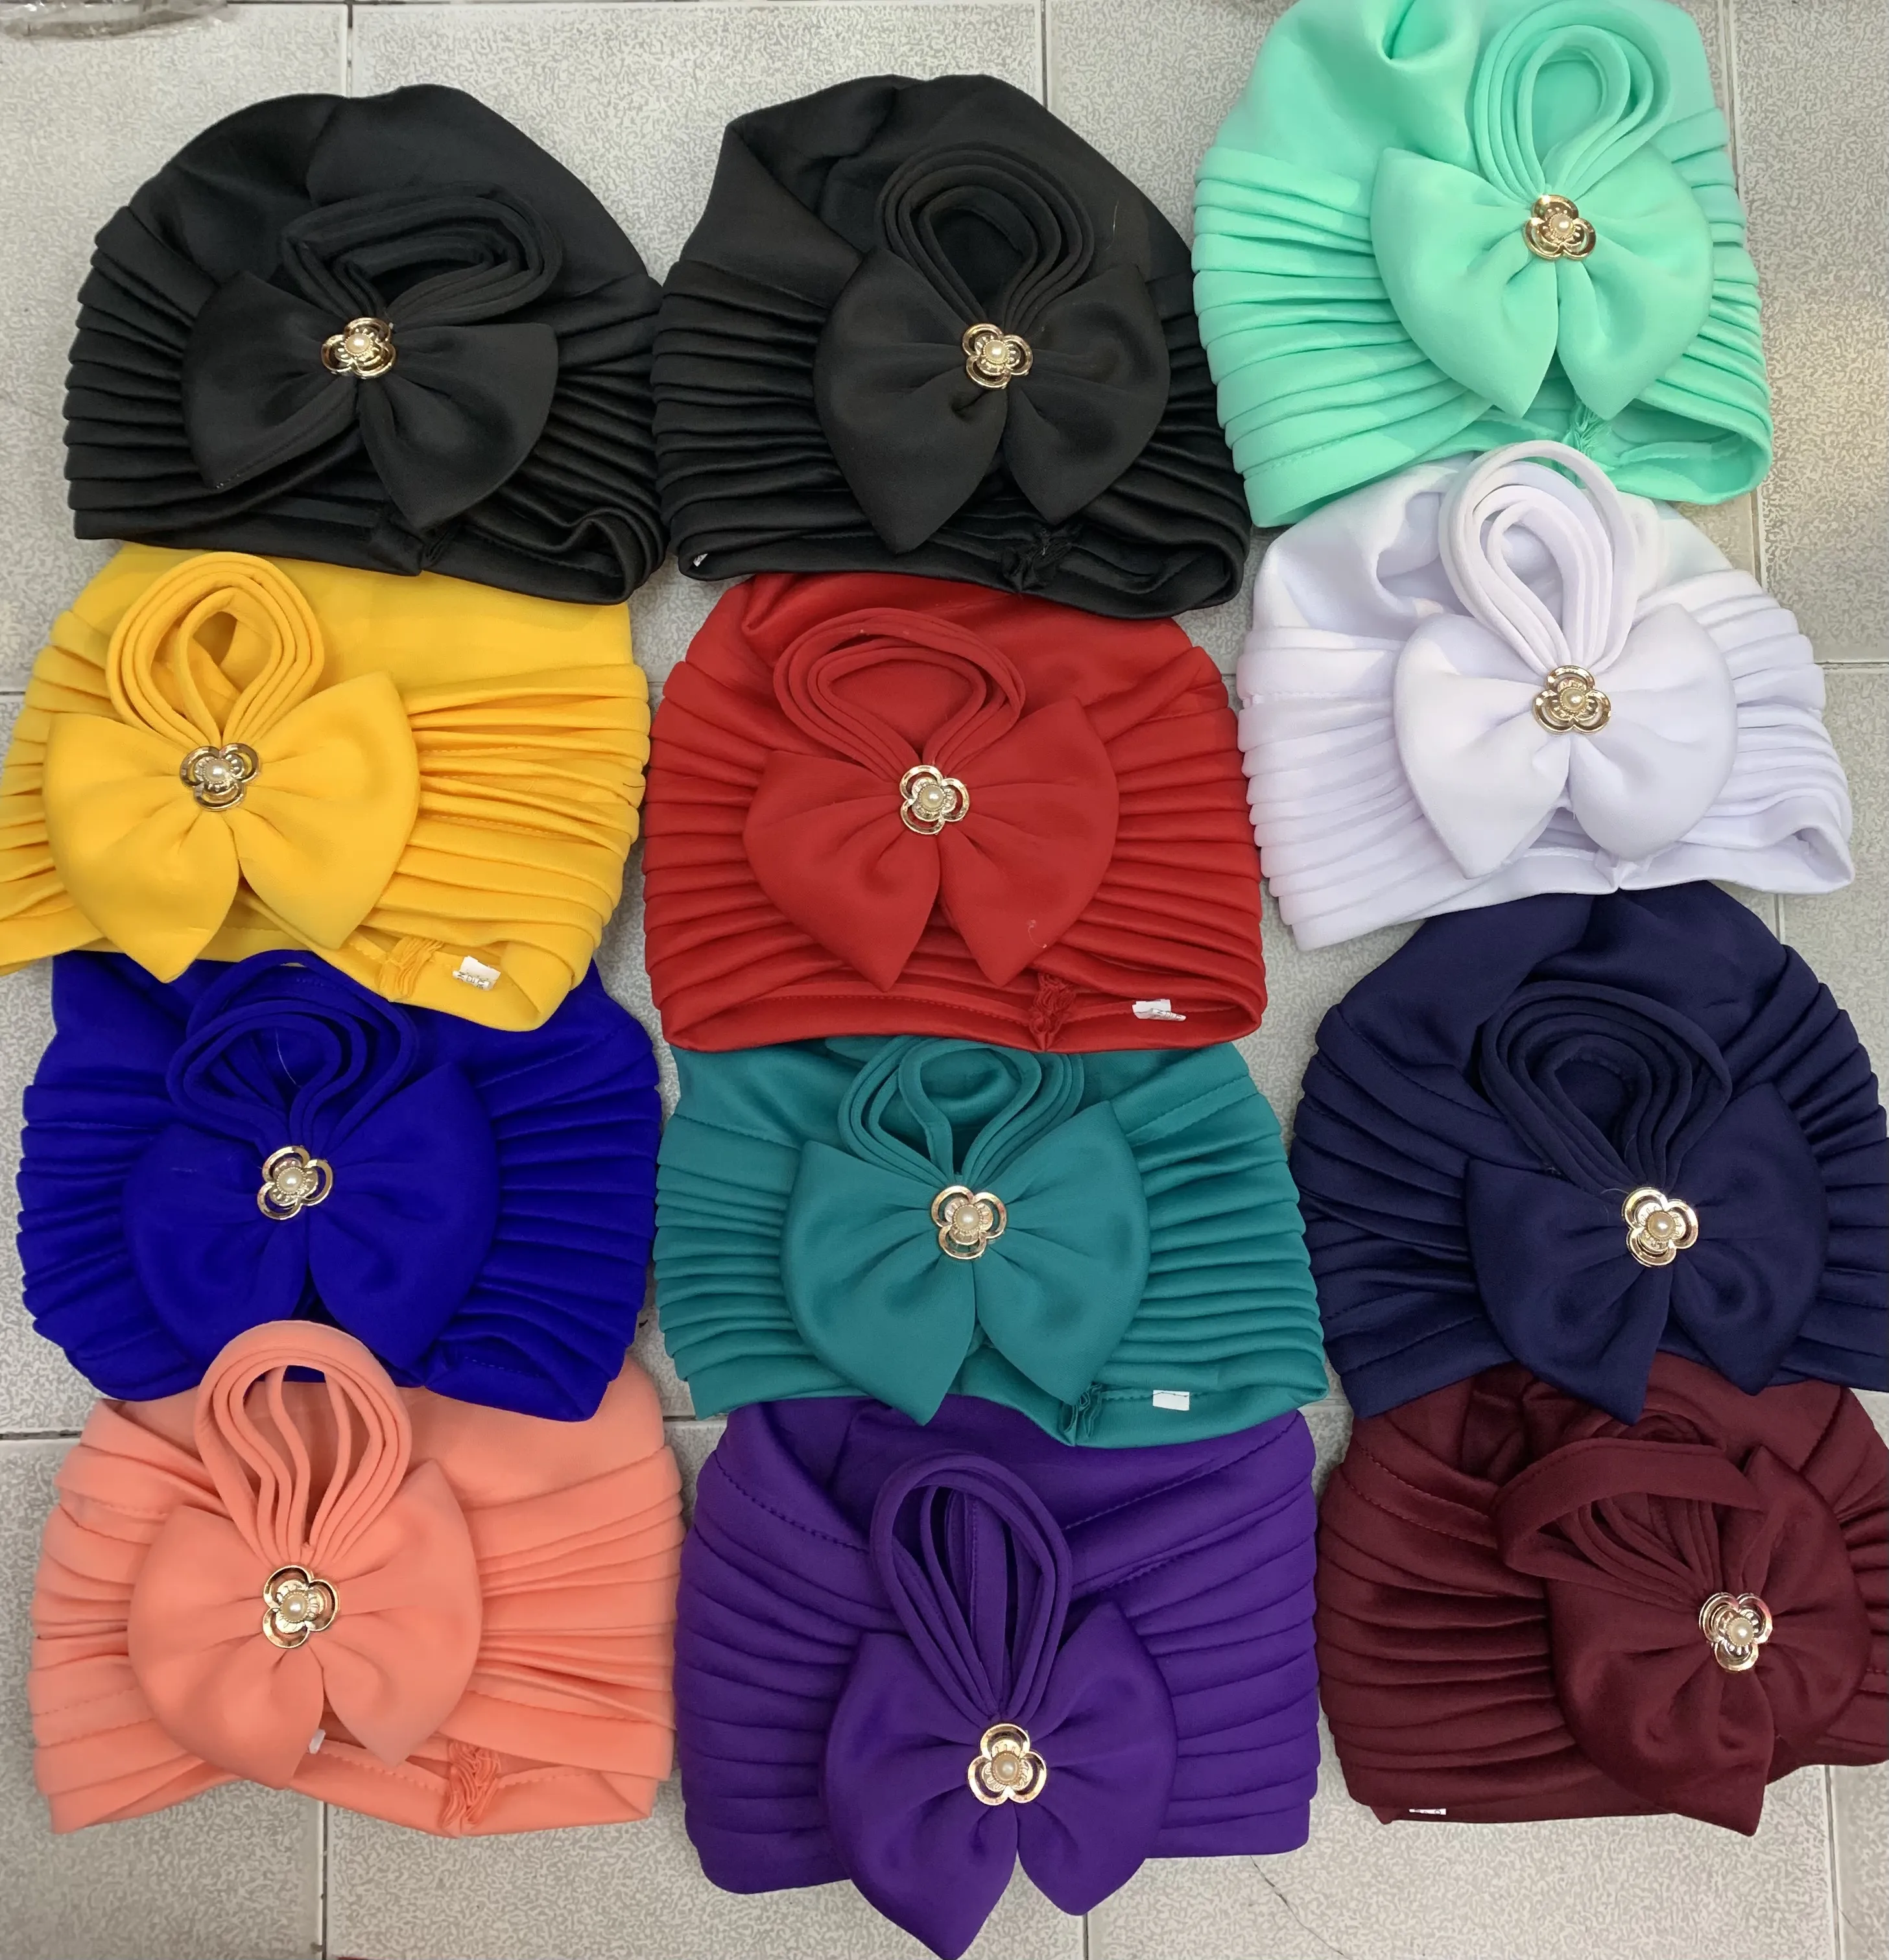 New special 12 pieces 1 dozens african turban cap wholesales price headscarf for women